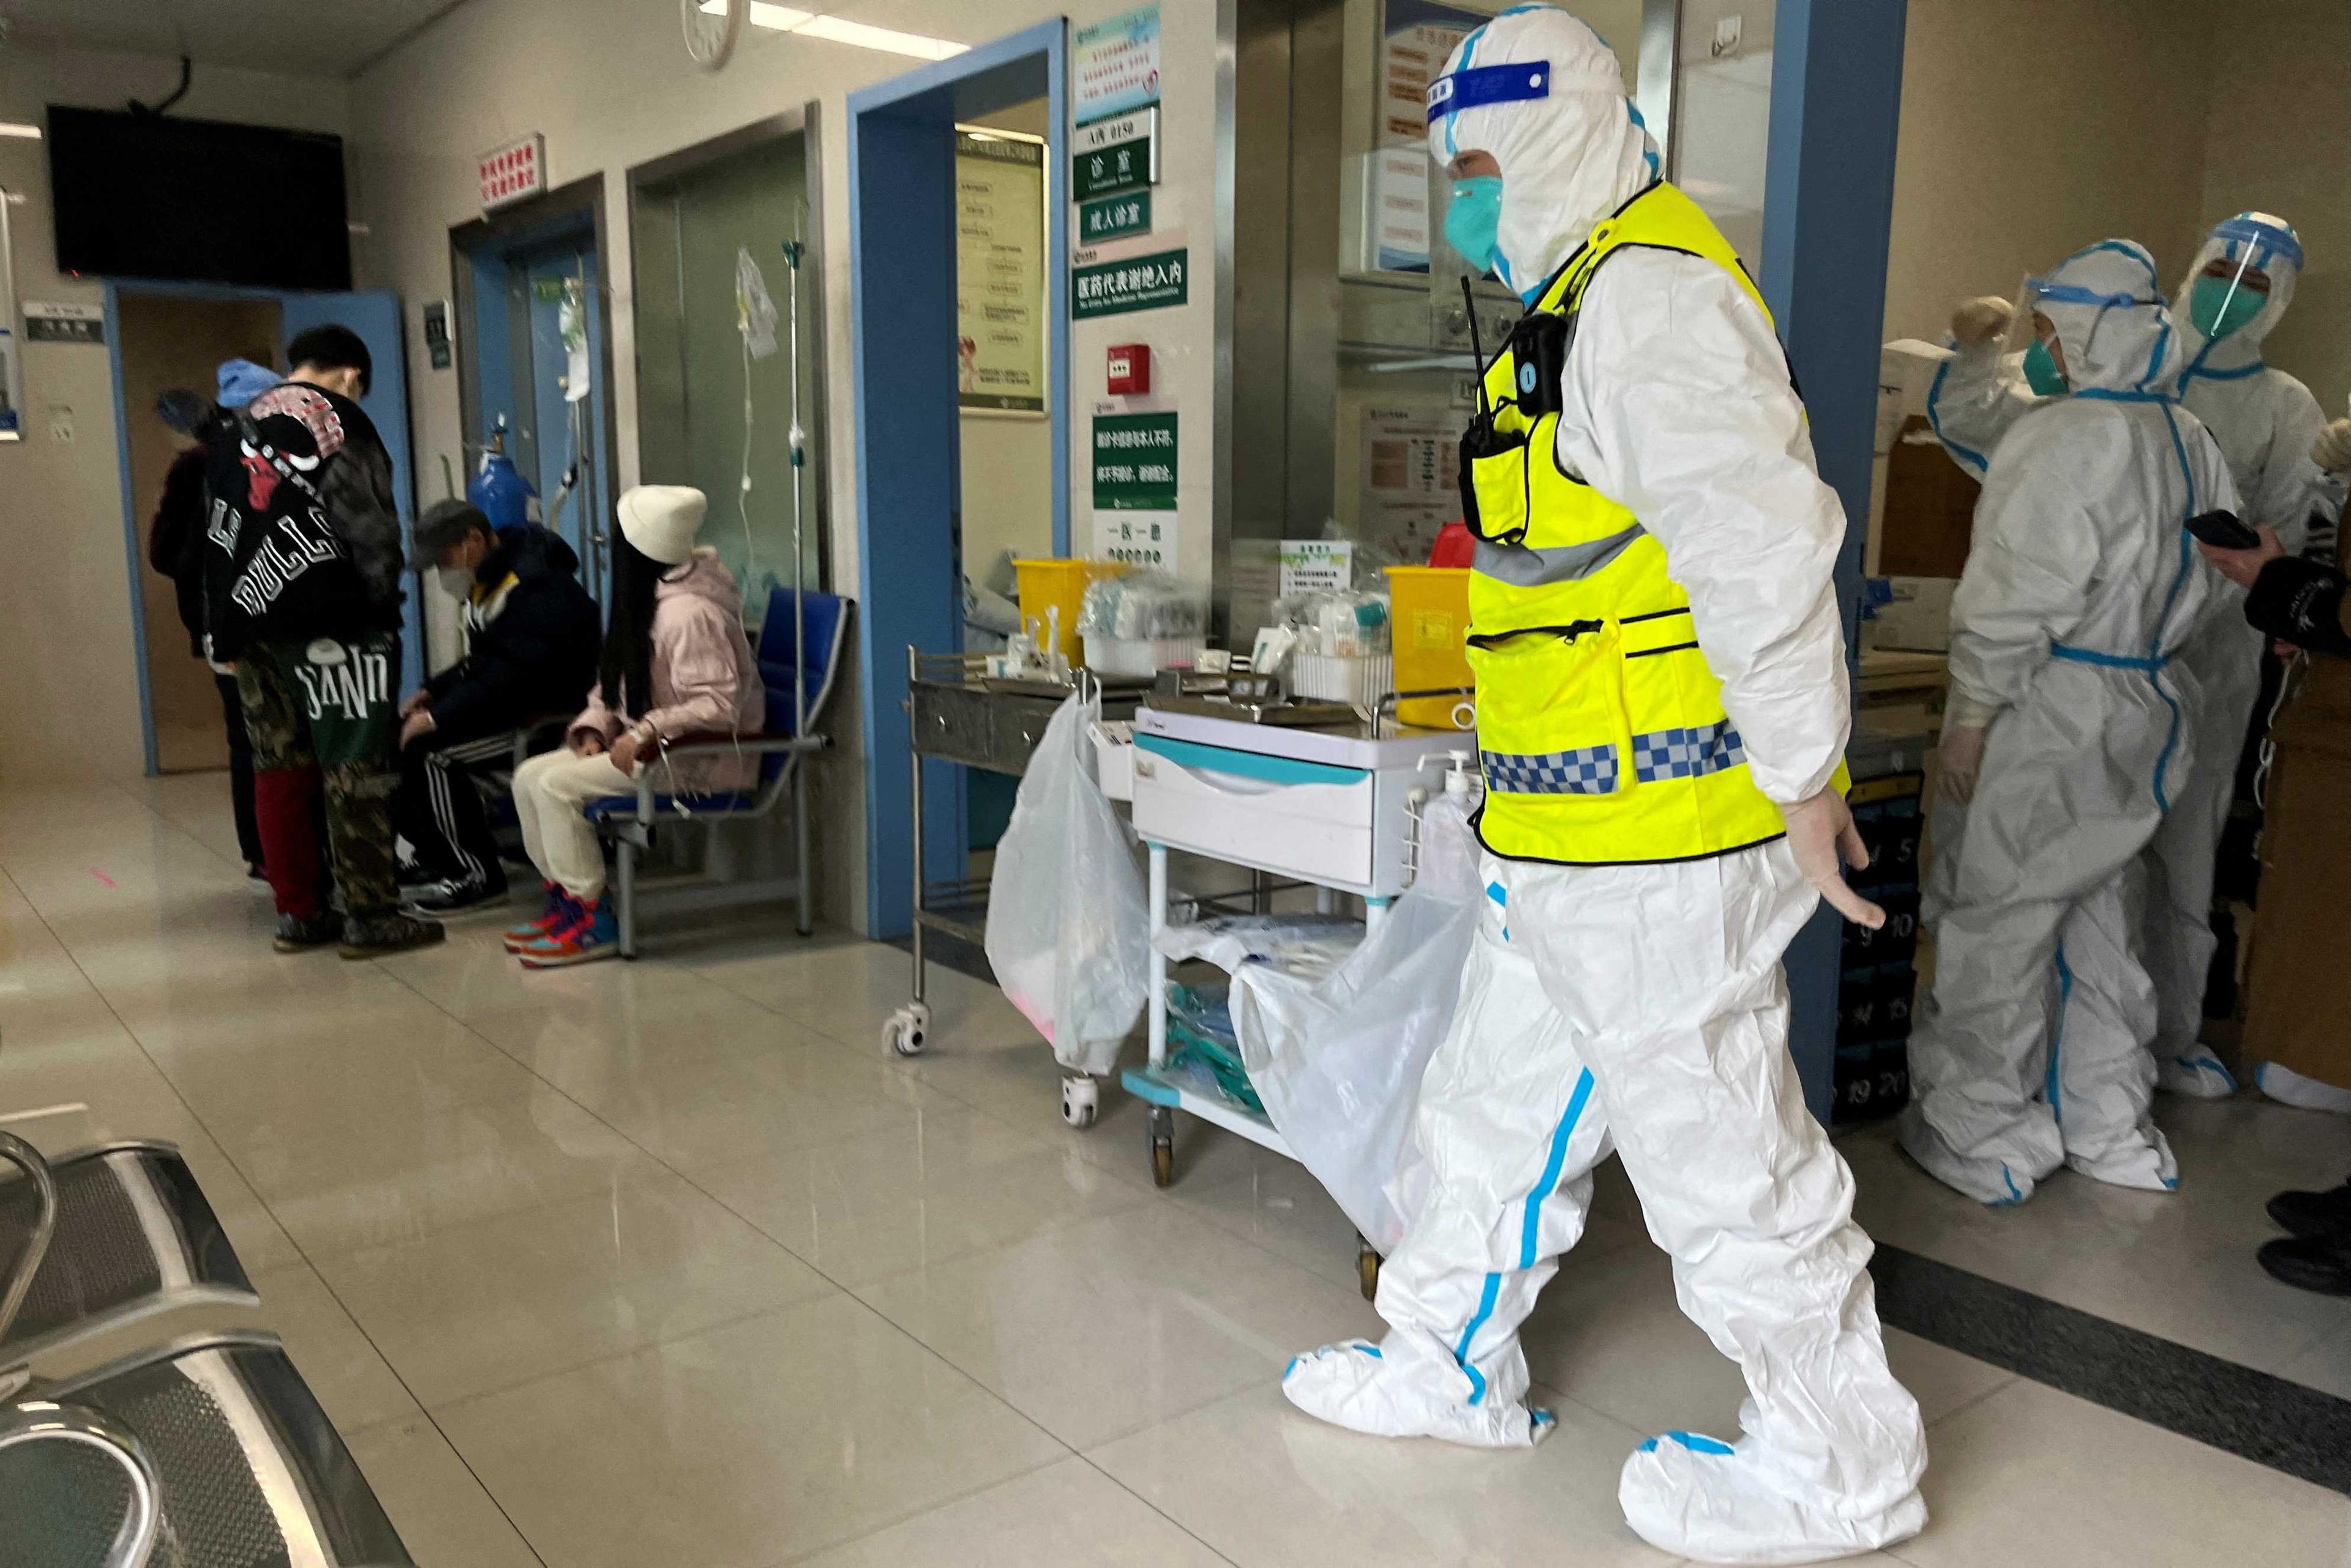 A security personnel in a protective suit keeps watch as medical workers attend to patients at the fever department of Tongji Hospital, in Wuhan, Hubei province, China Jan 1. Photo: Reuters